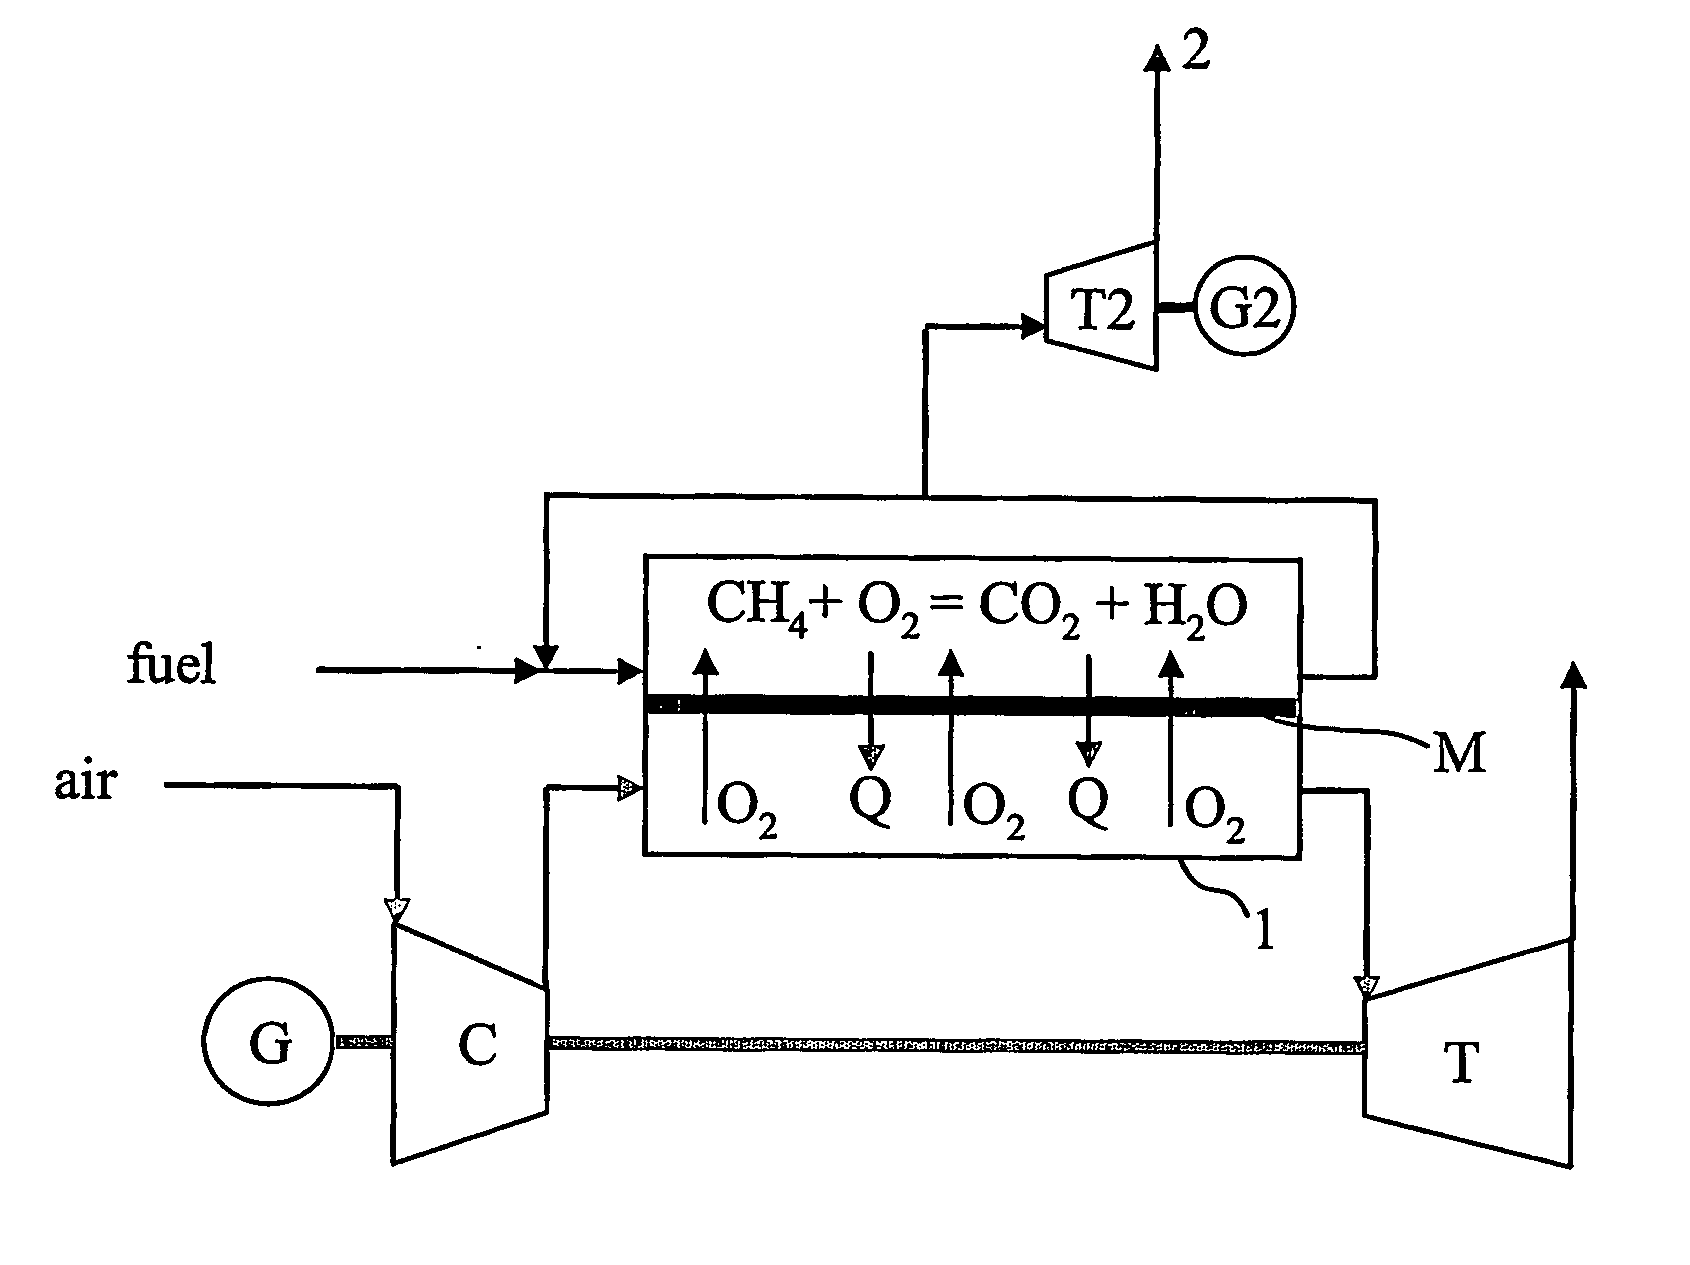 Control of a gas turbine with hot-air reactor